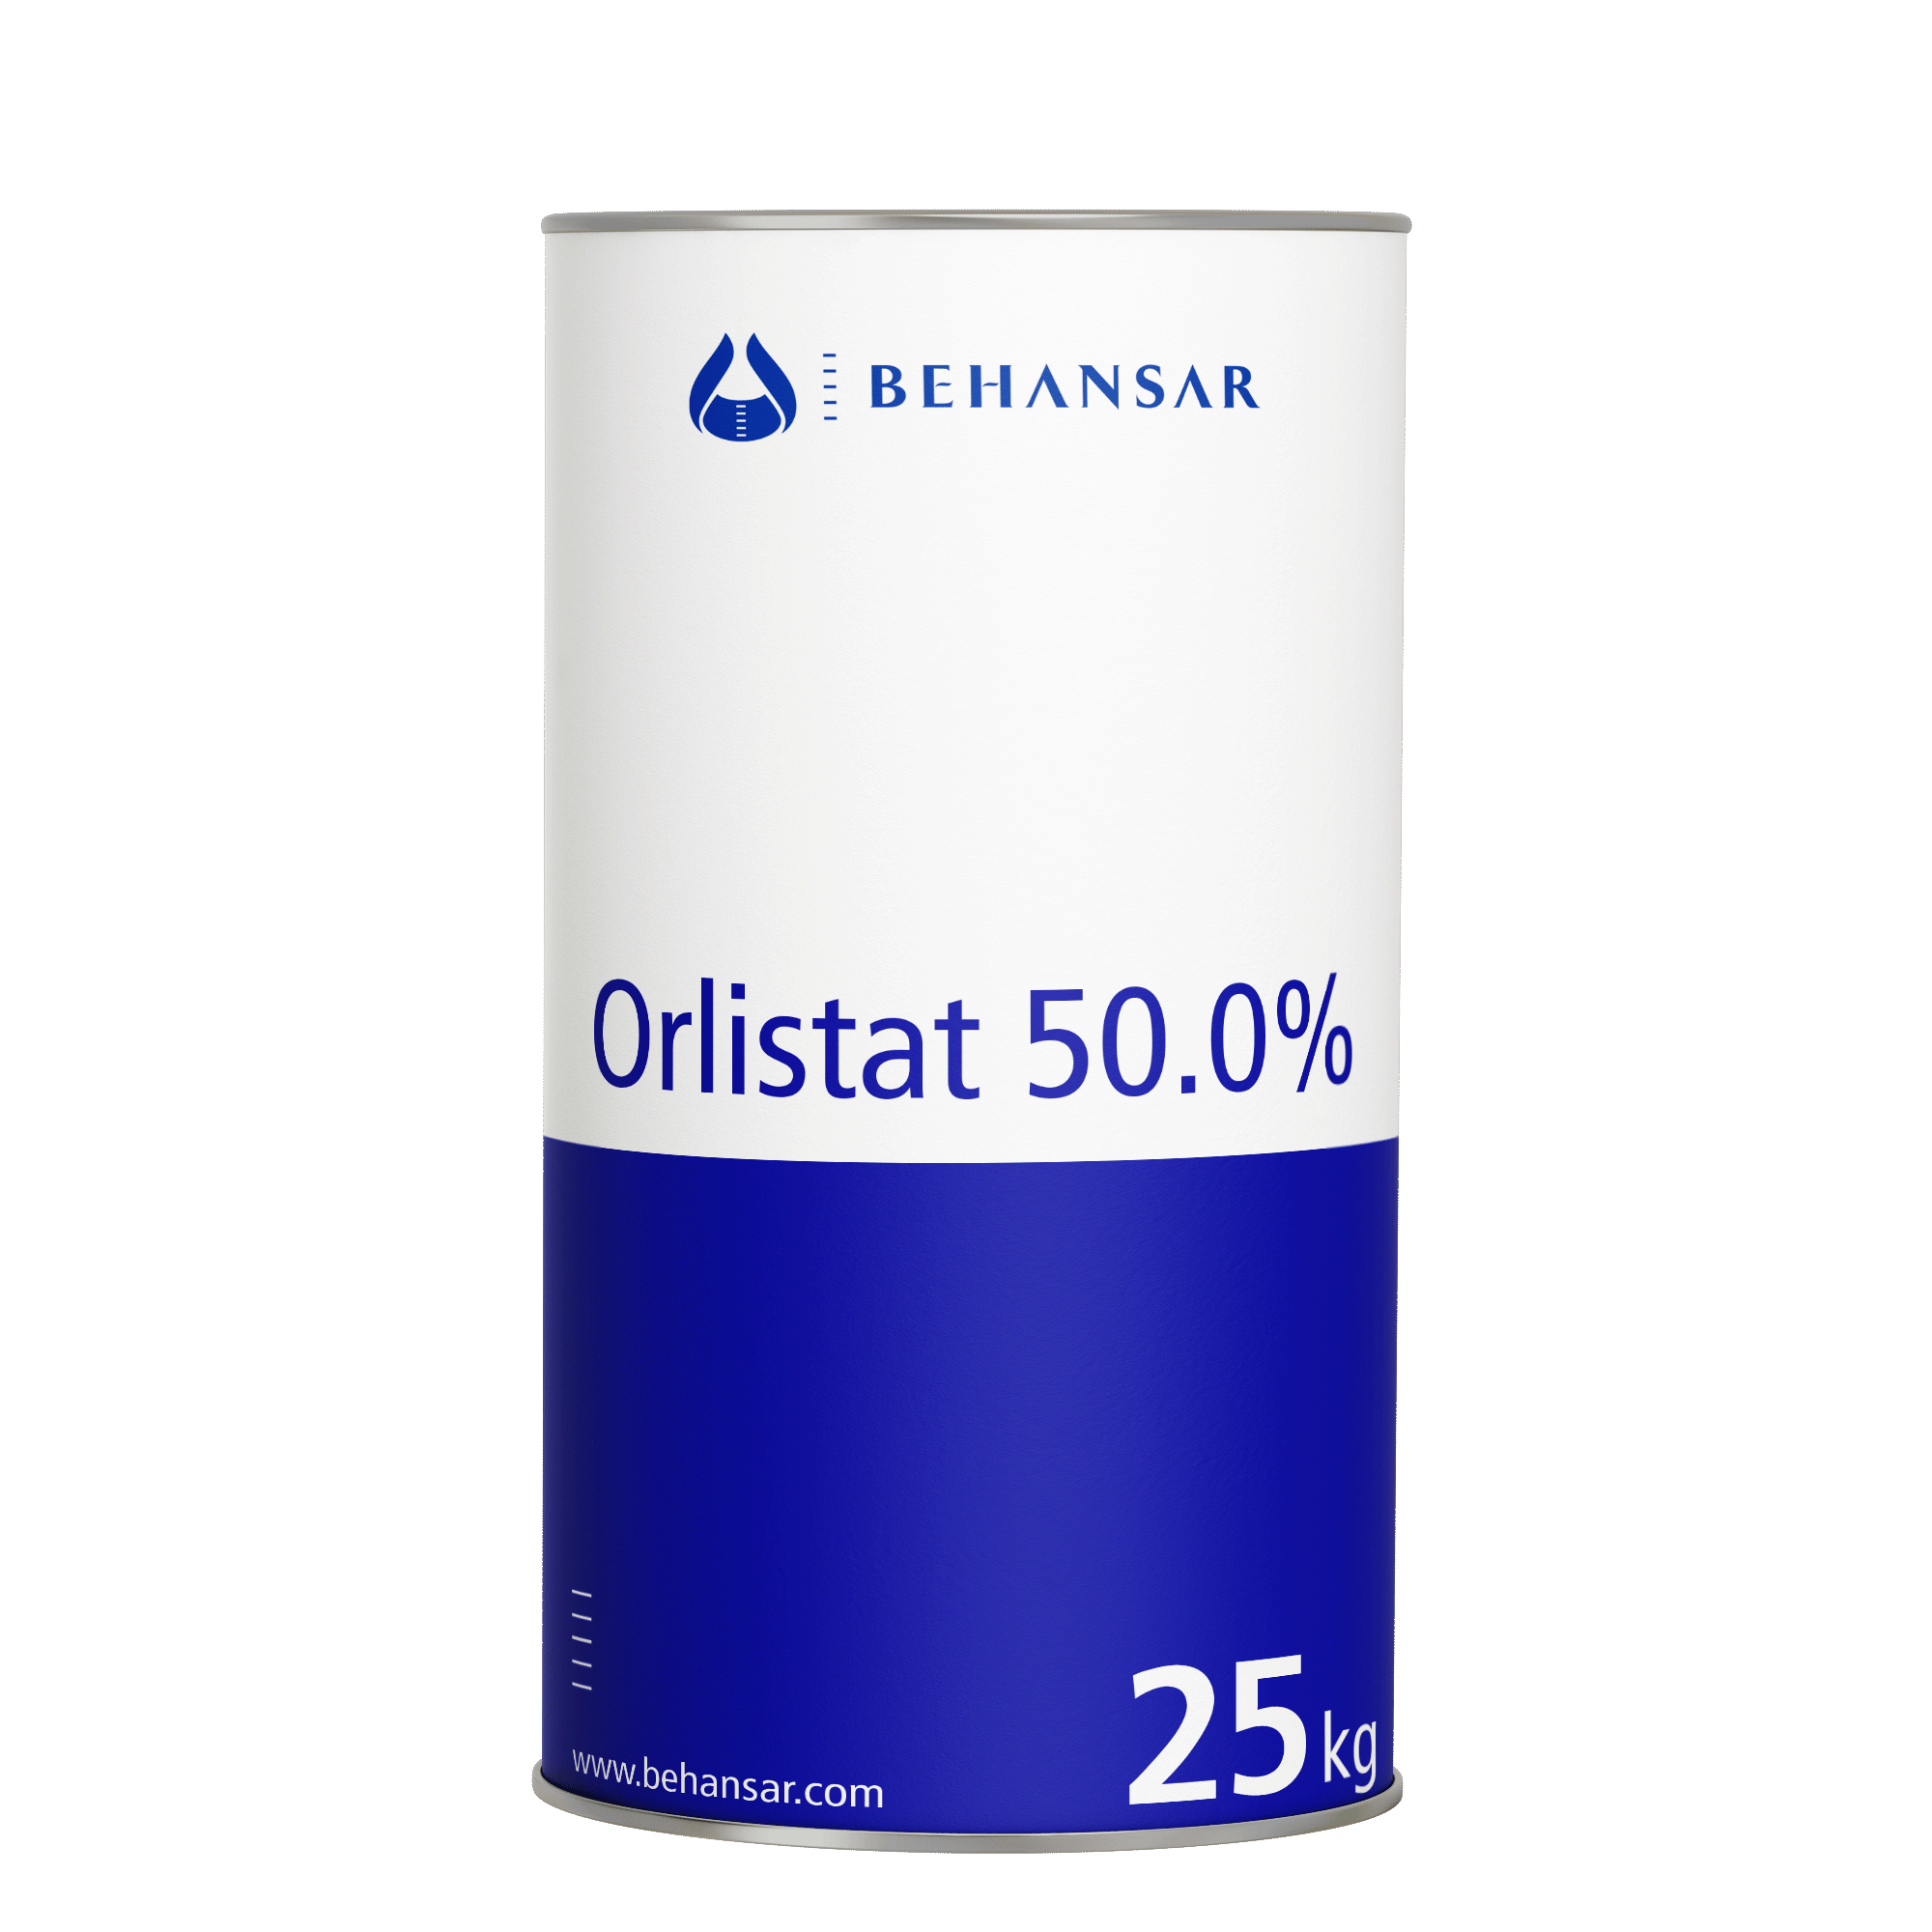 Orlistat 50.0% is one of the products of Behansar Co